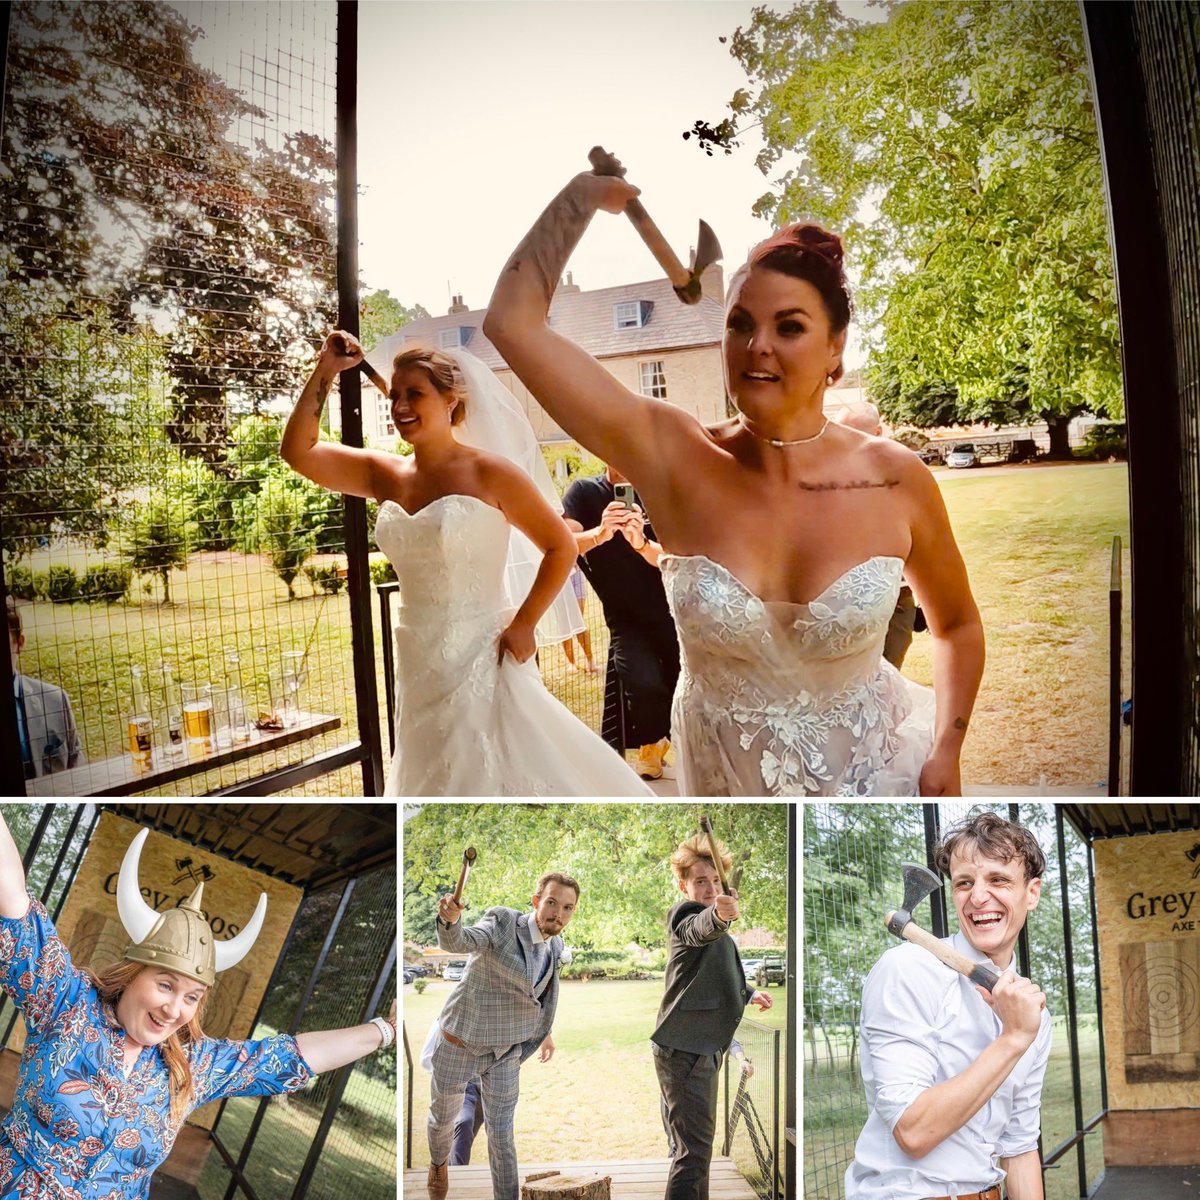 Looking for something different to keep your guests entertained? How about Axe Throwing? 🪓🪓

#AxeWeddings #weddingday #axetrailer #weddinginspiration #weddingplanning #norfolkwedding #norfolkweddingsupplier 
#UnforgettableMoments #WeddingGoals